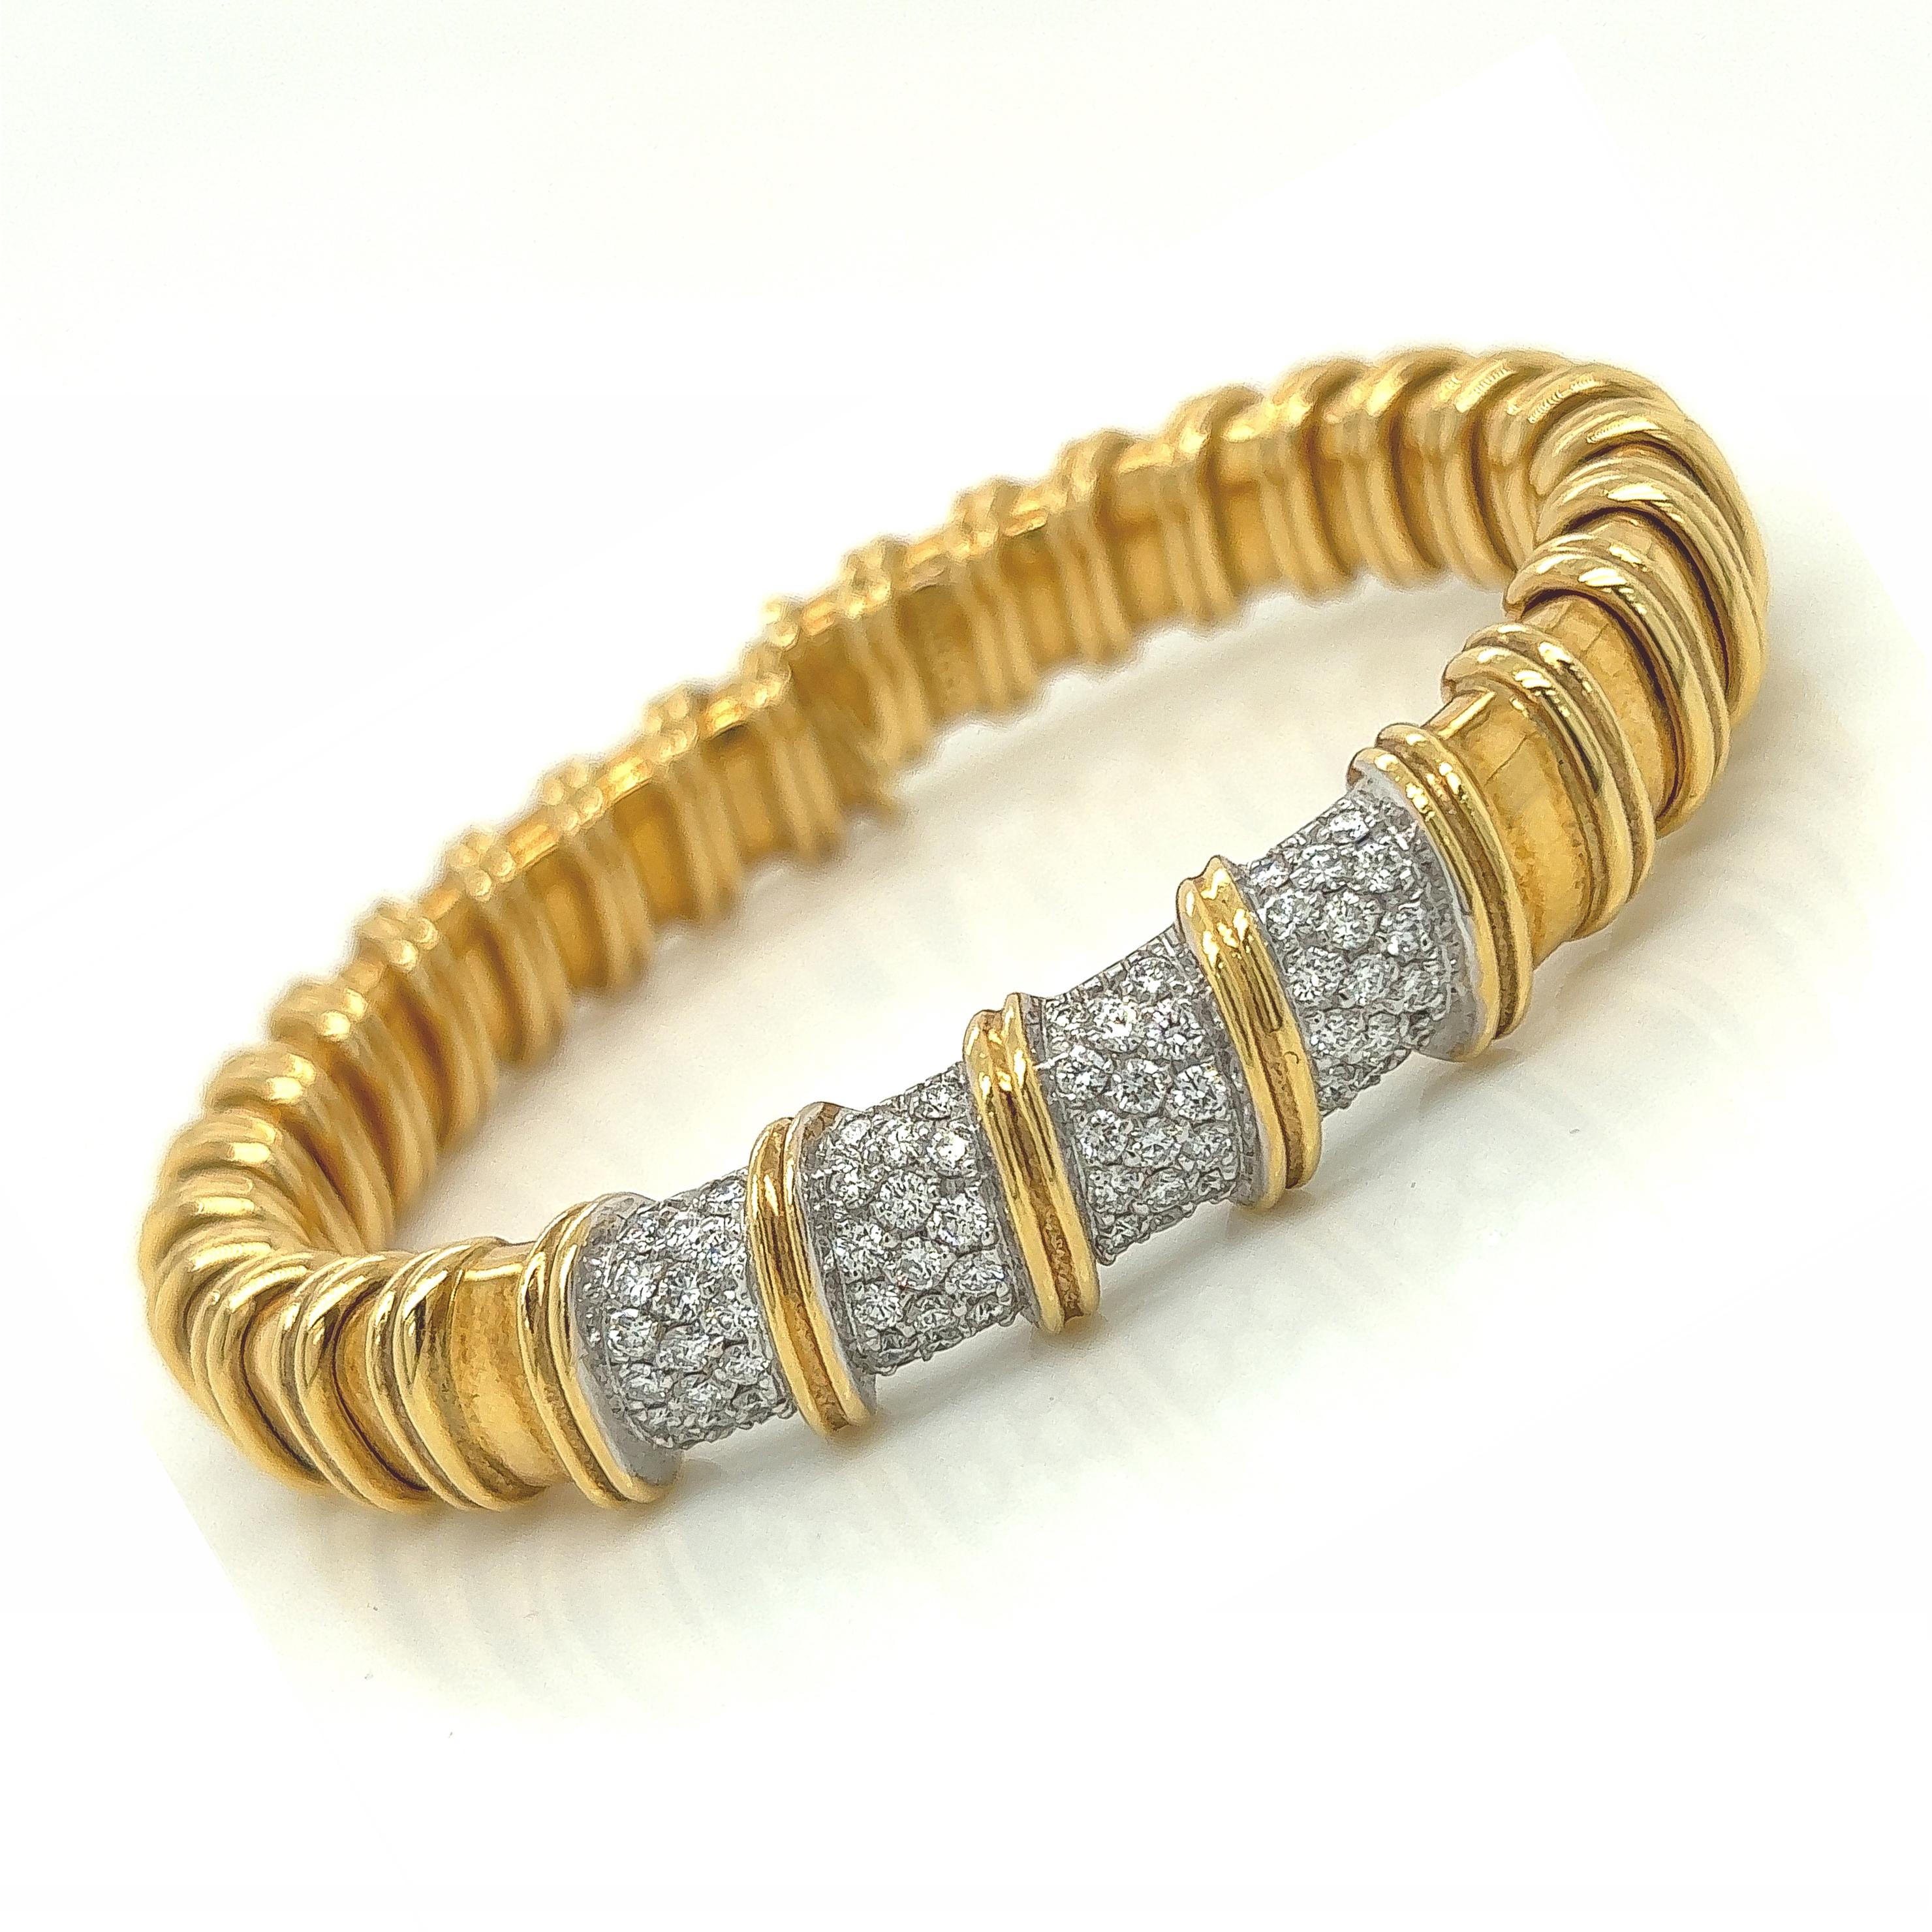 Roberto Coin Yellow Gold Diamond Bangle 2.08cts

A bold accent crafted in yellow gold with a spiral design that lends immediate texture. Accented with 2.08ct in round diamonds of impeccable quality (E-F in color, VVS-VS in clarity).
Diameter: